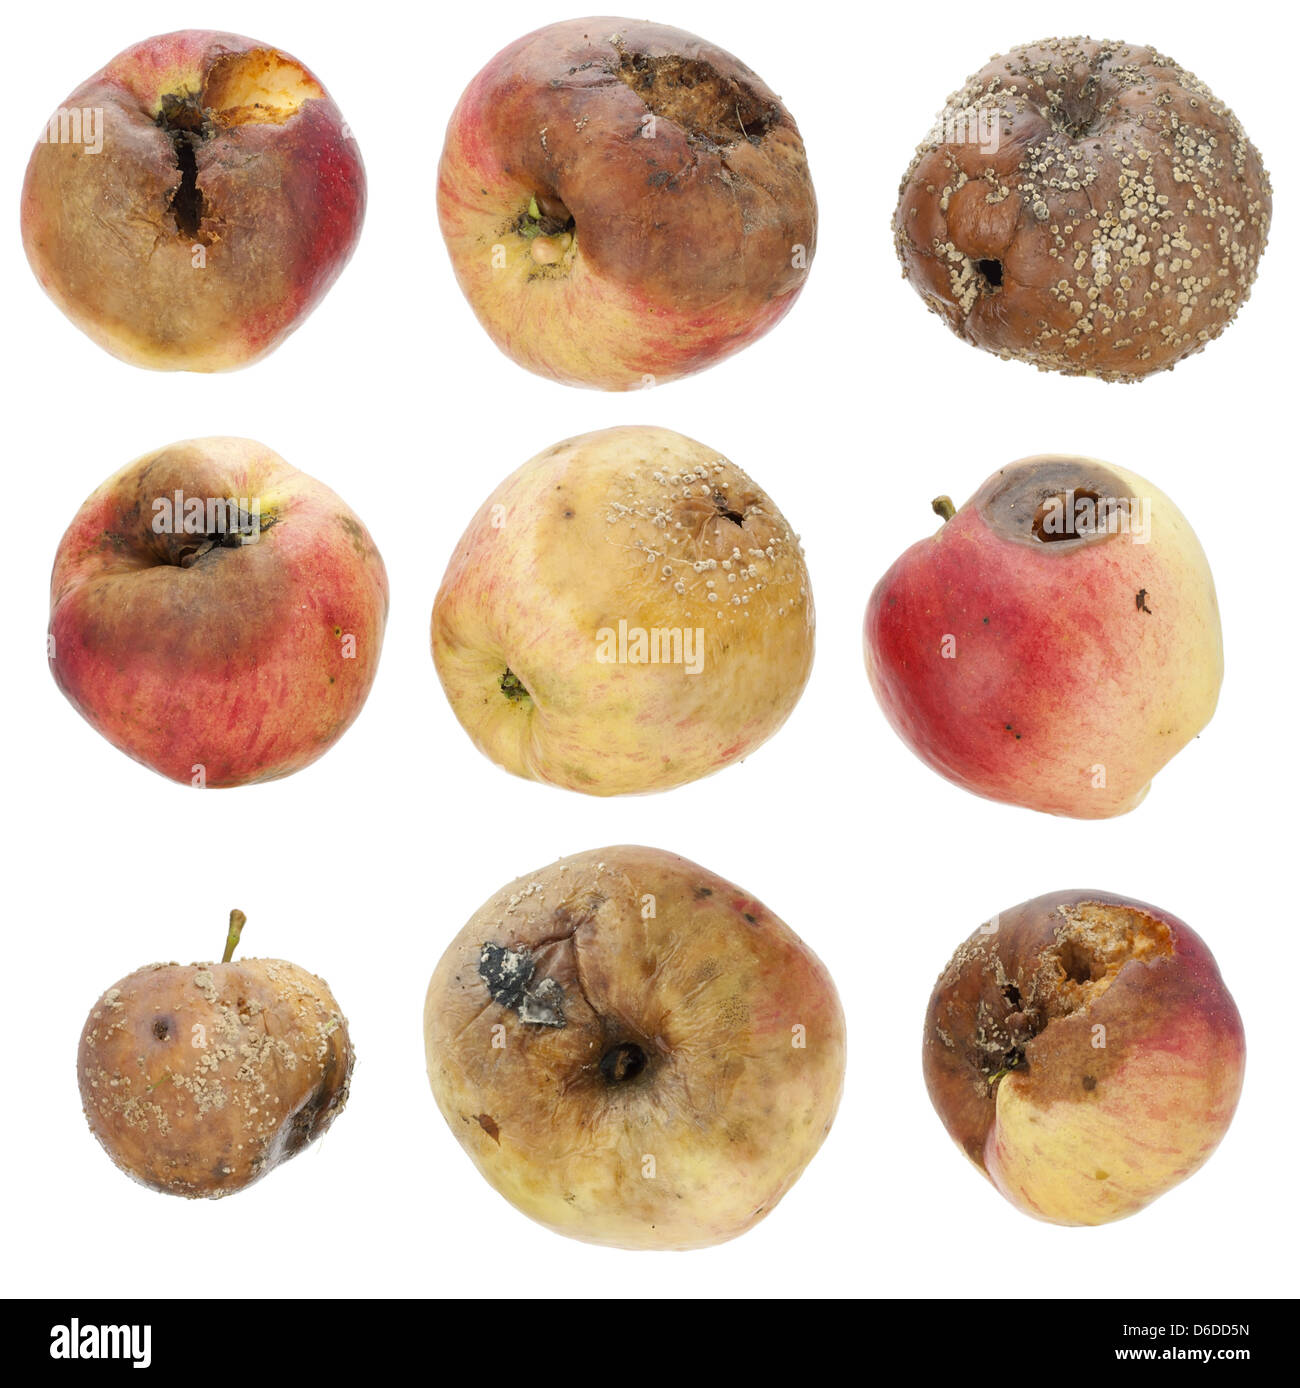 The rotten spoiled inedible apples set Stock Photo